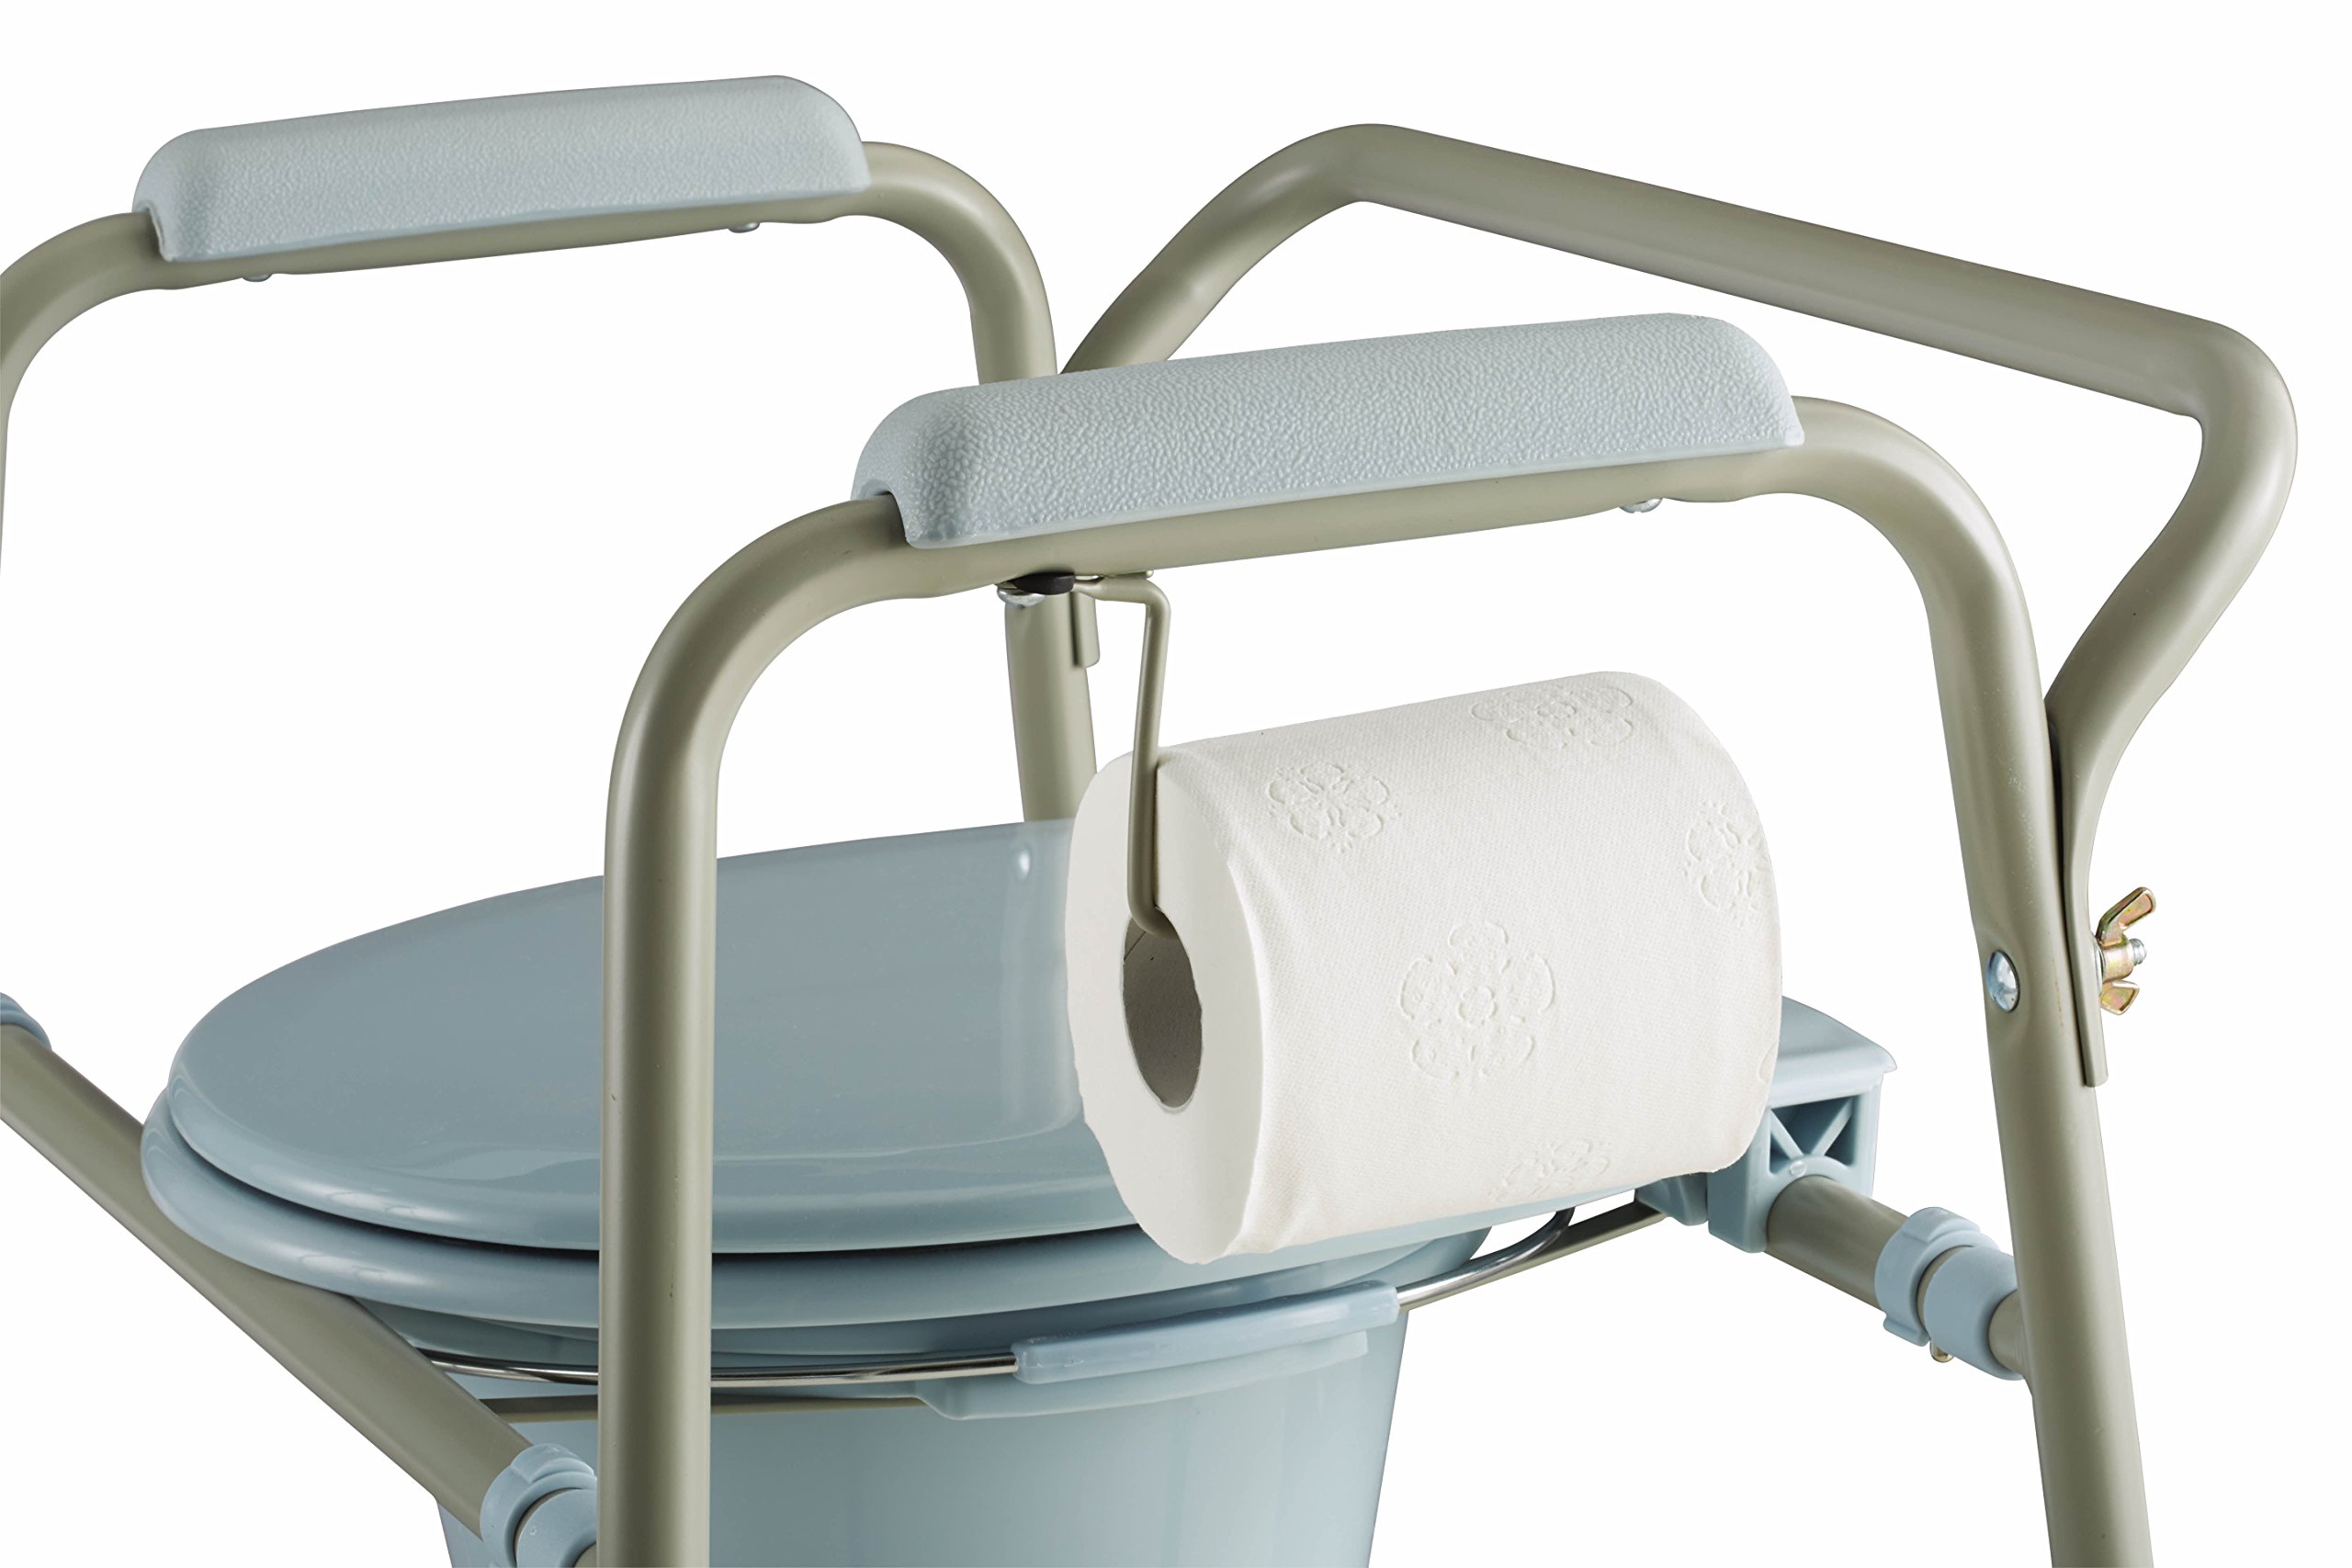 How To Install A Commode Chair Toilet Paper Holder